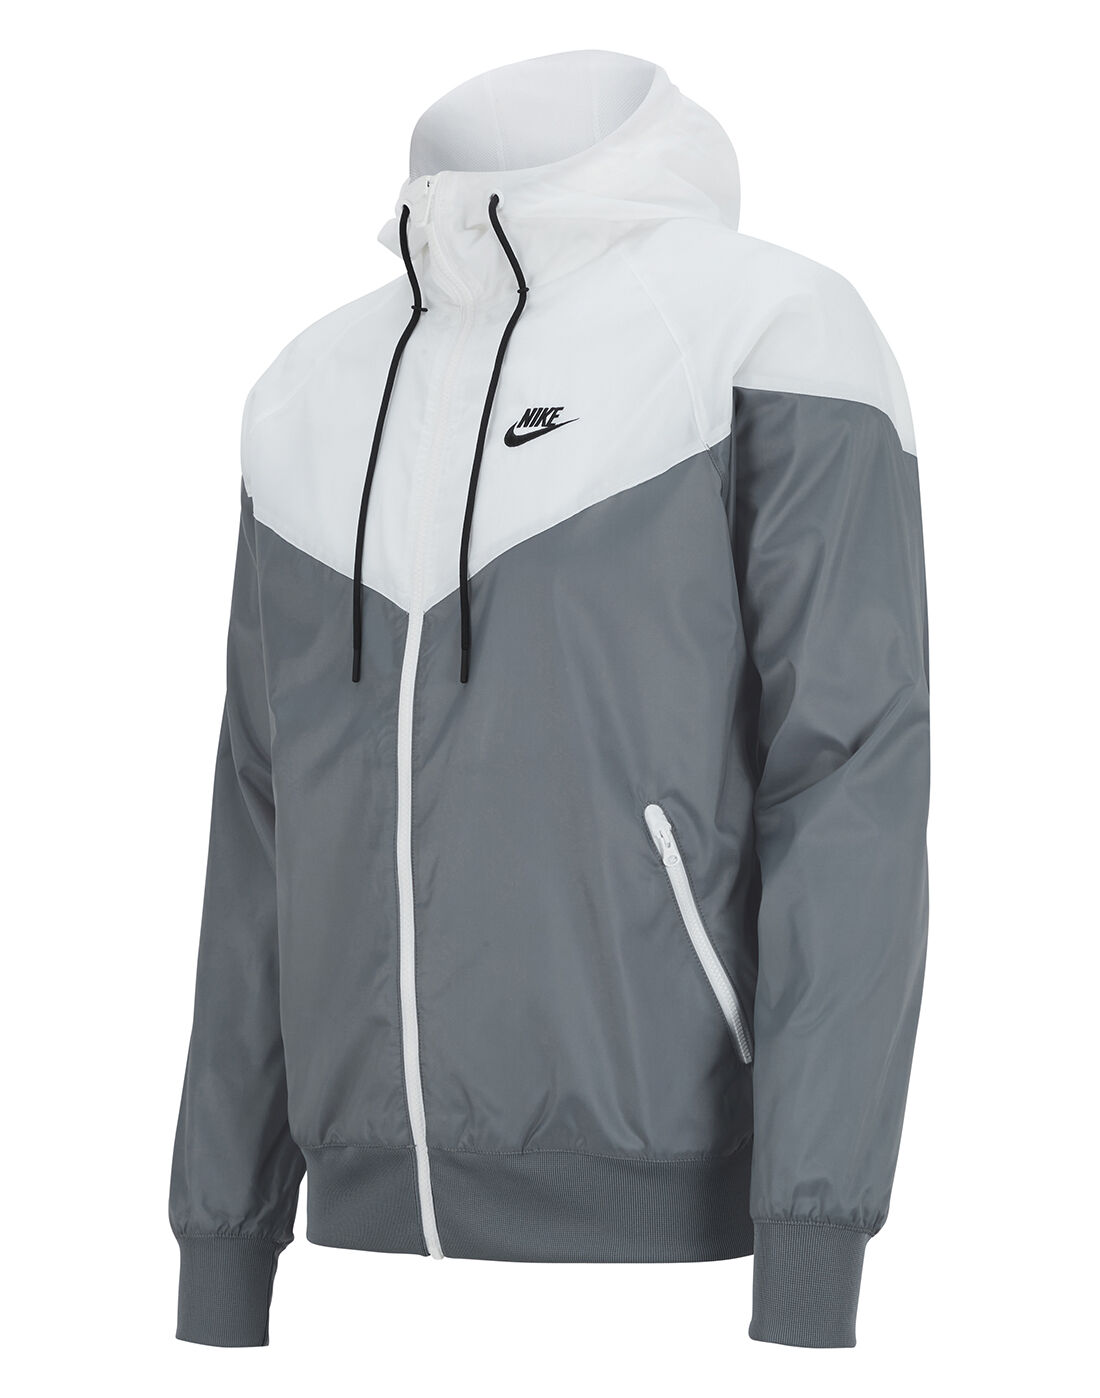 total sports nike jackets,Cheap,OFF 76%,isci-academy.com